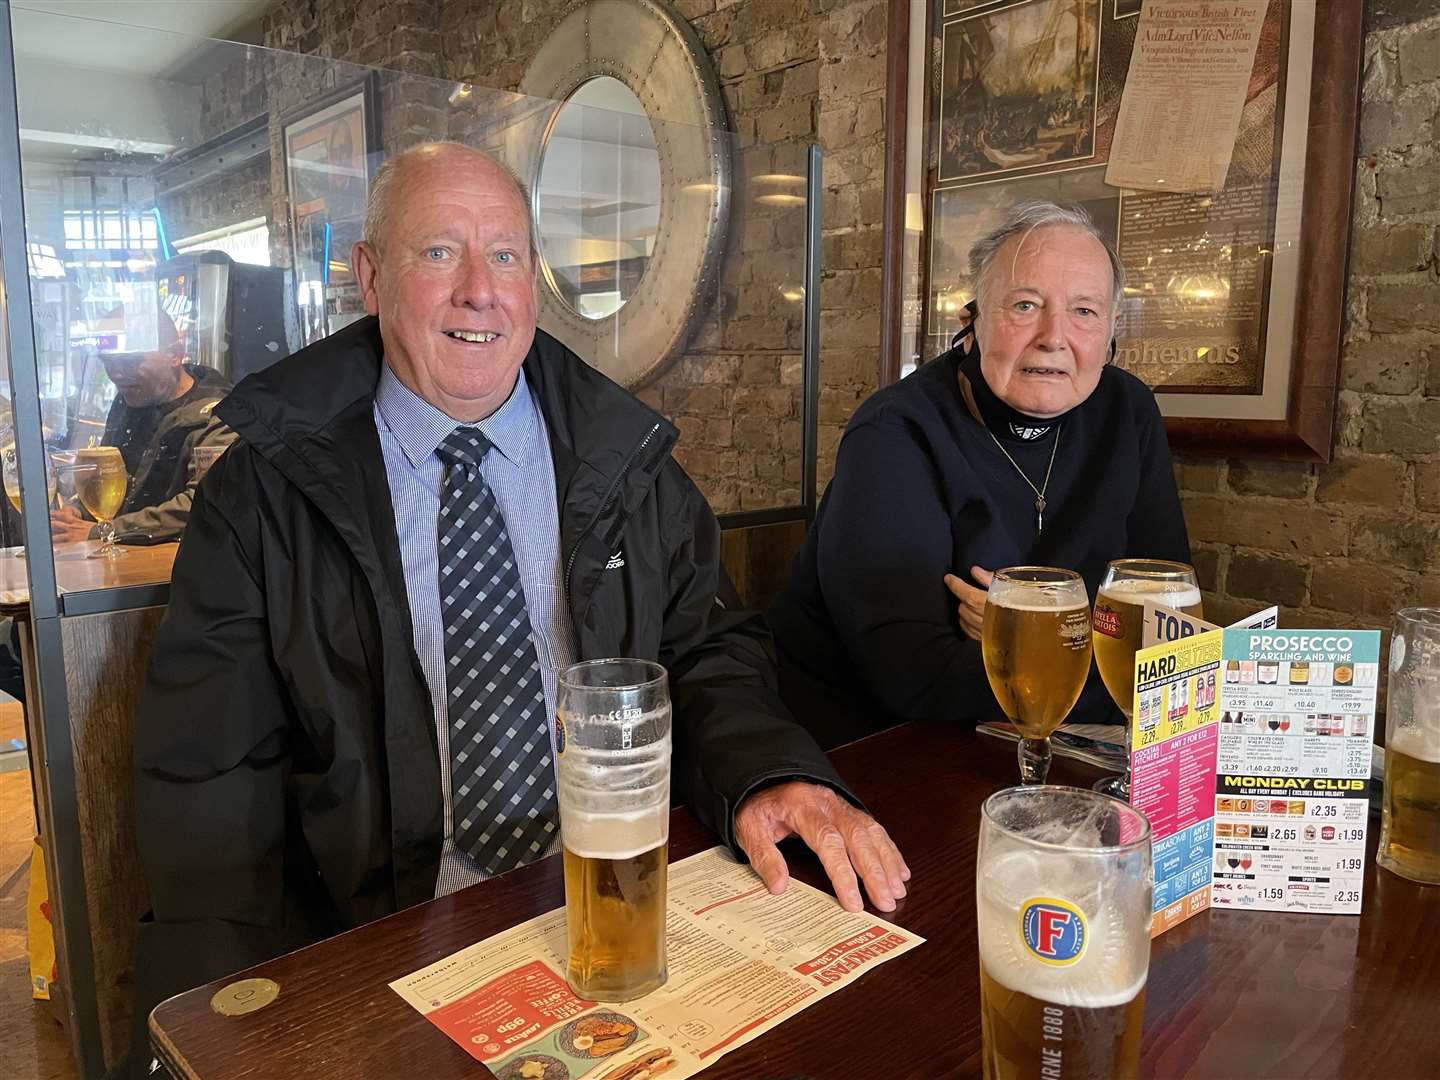 Eric Barnes, 73, and Peter De Moore, 75, enjoying a pint inside the Belle and Lion Wetherspoons pub in Sheerness High Street